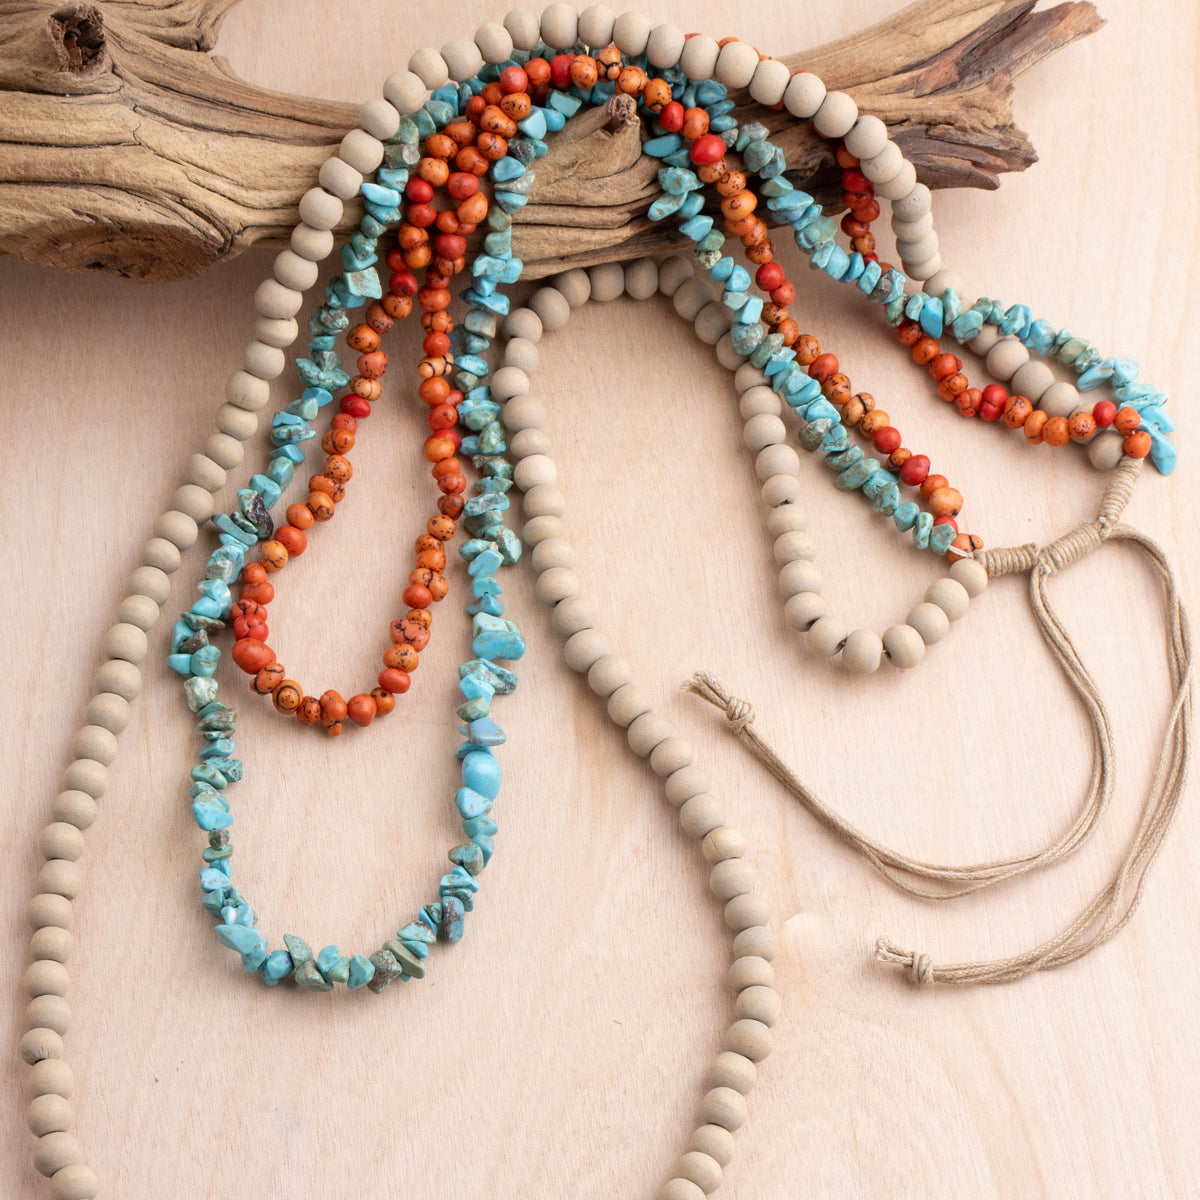 Taos 3 Layer Necklace